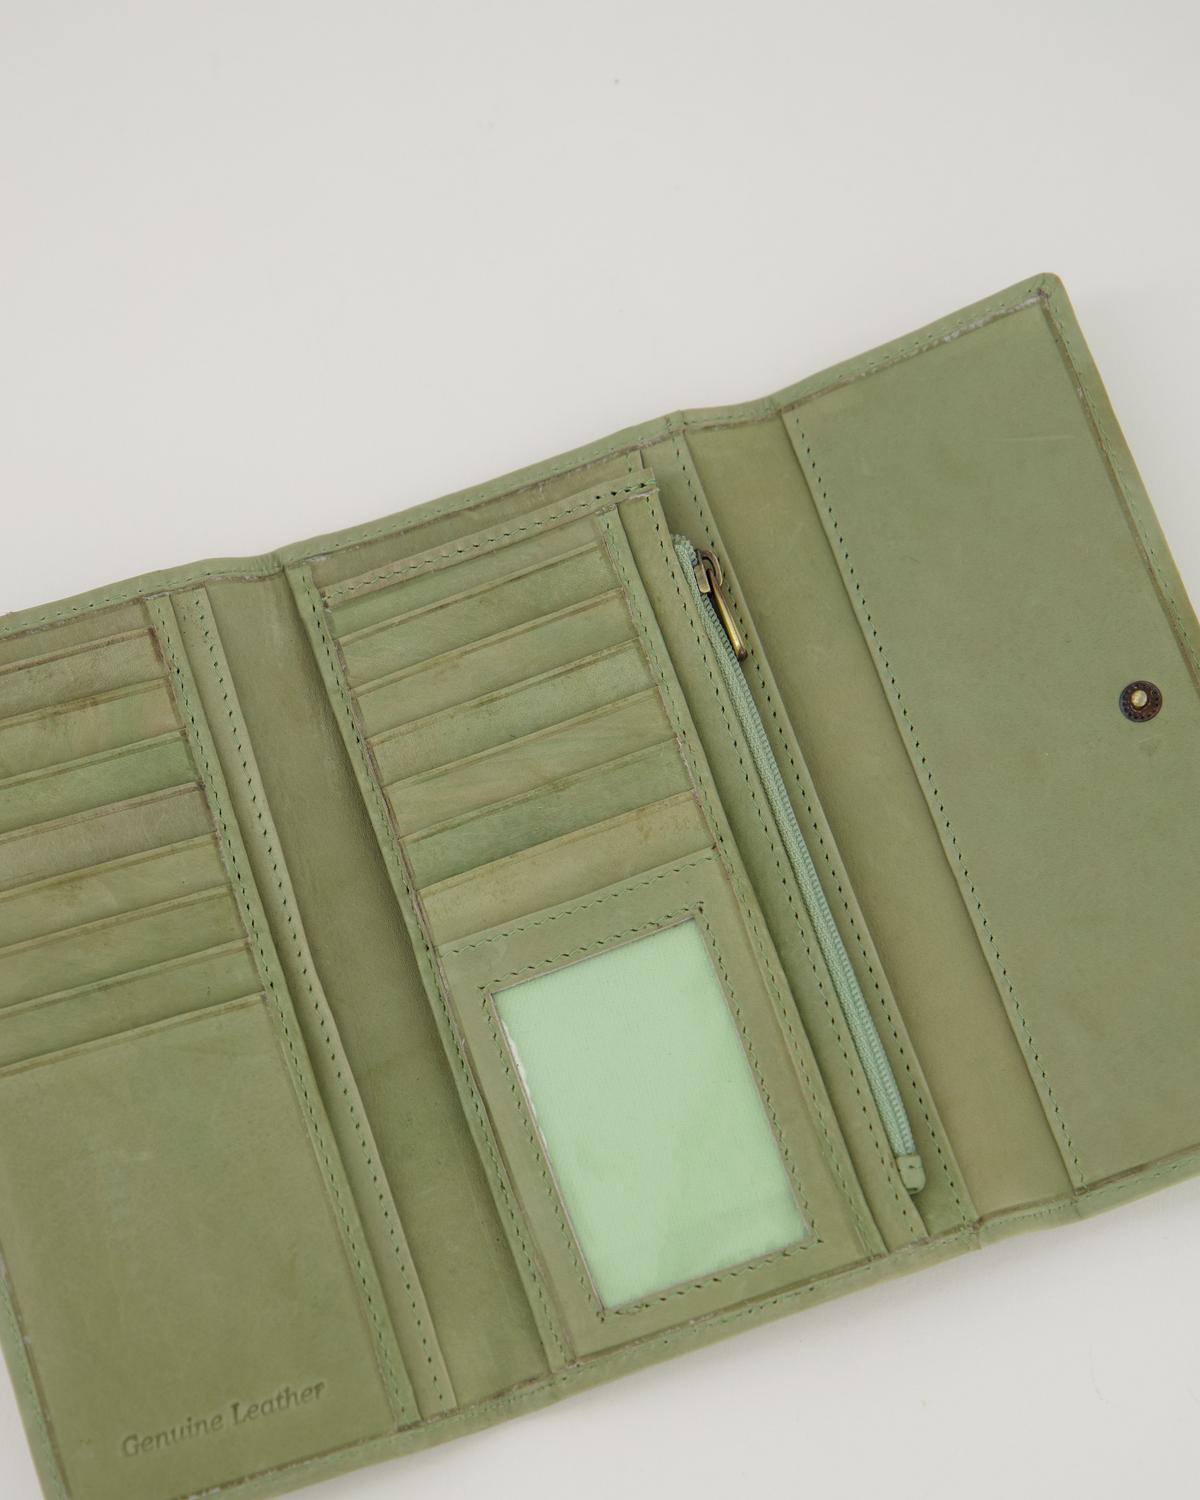 Sonia Structured Leather Wallet -  Green